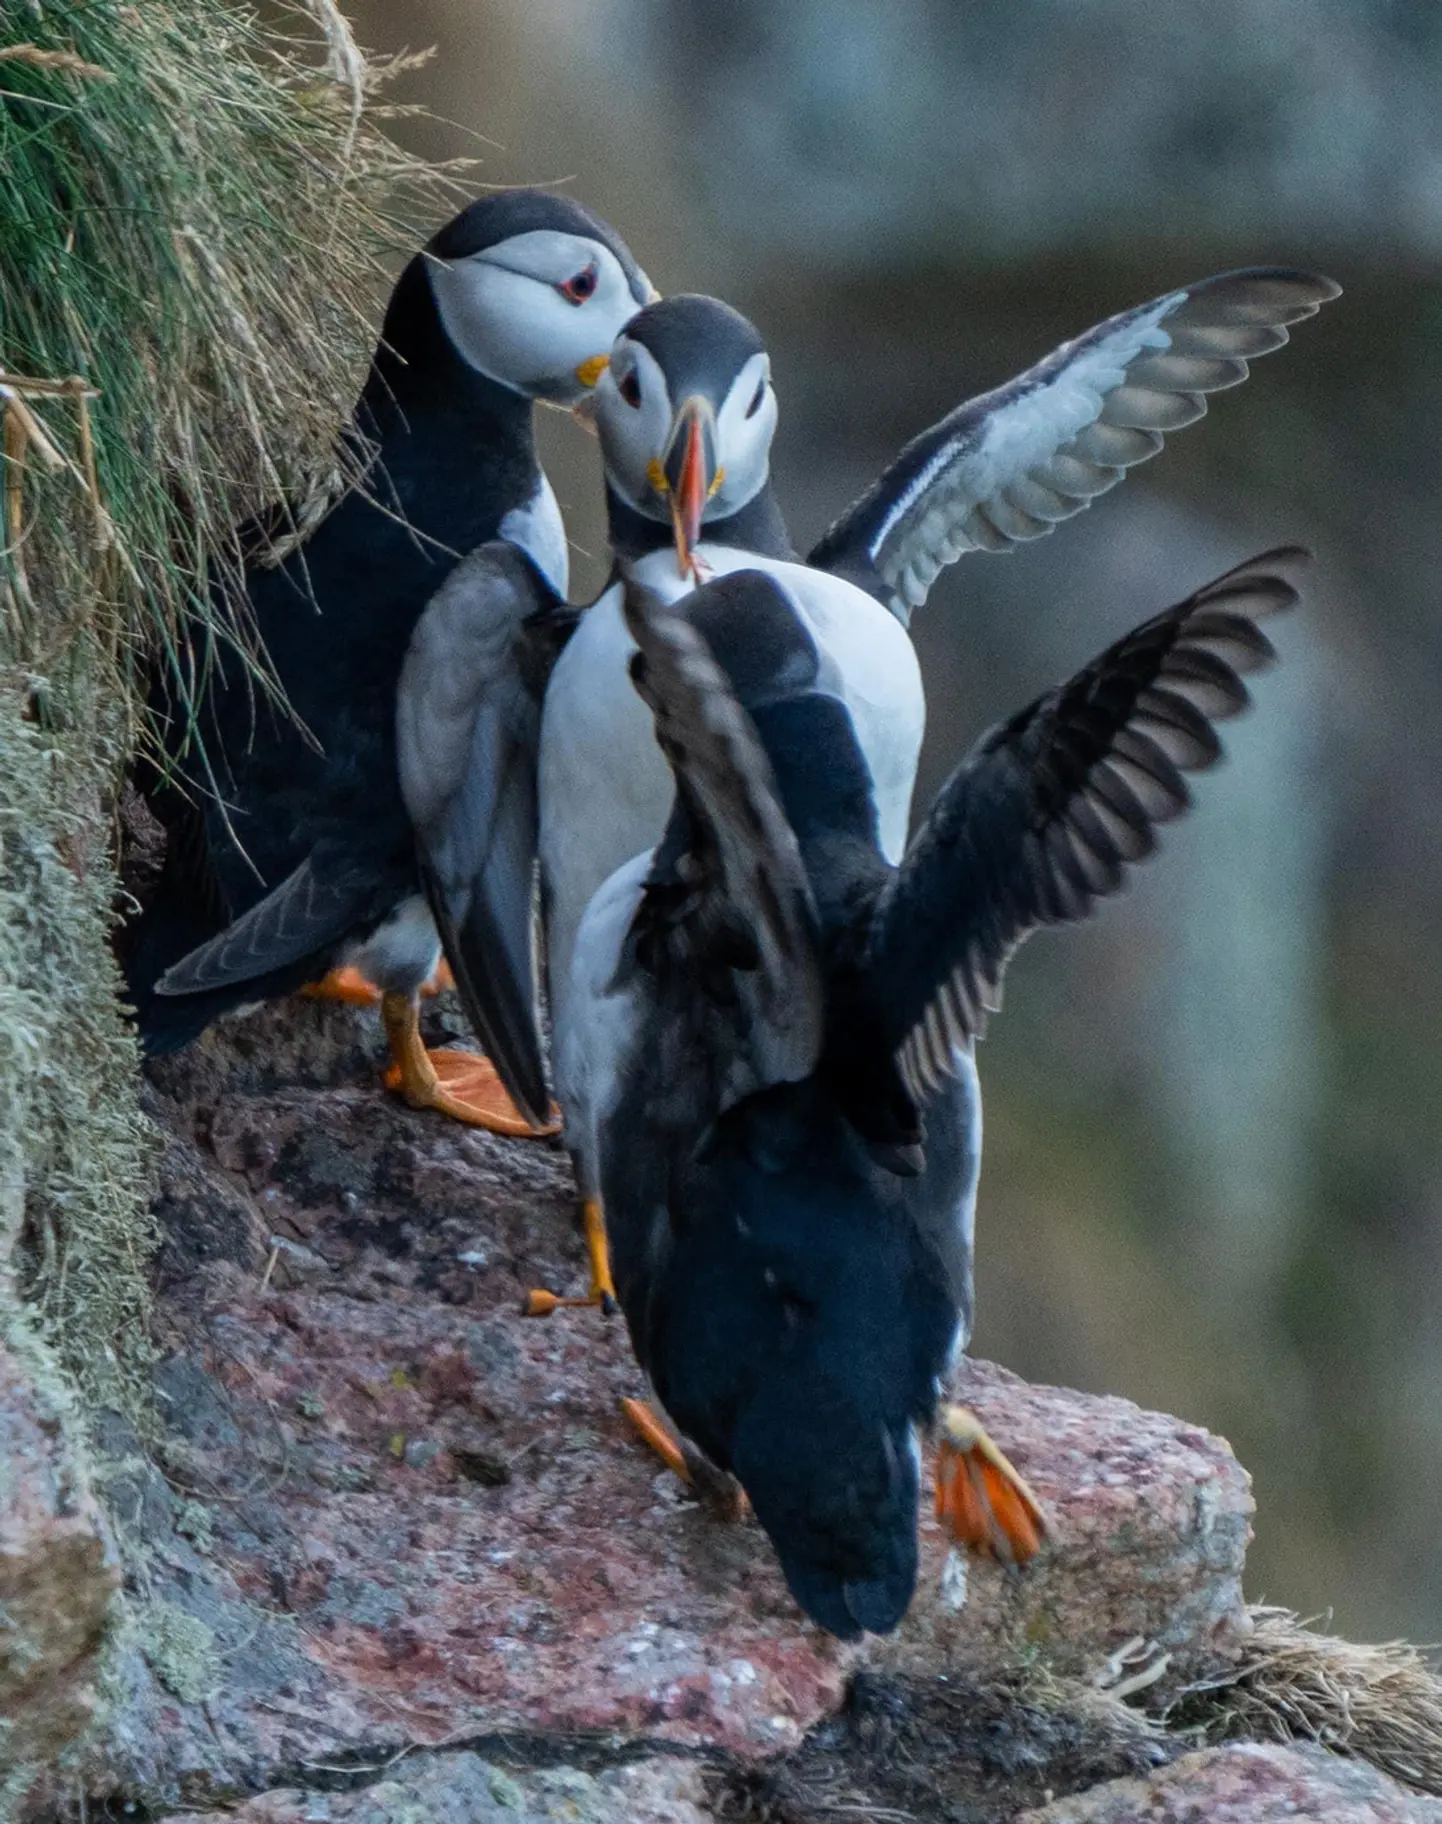  A family of puffins share a meal as they stand nestled into a red sandstone cliff face. The 3 birds have large, orange webbed feet that stick out from stubby, white feathered legs. Their plumage is crisp white with sleek black feathers on their backs, wings and neat to the small heads, giving a hood- and -cloak-like appearance. The blue, orange and yellow stripes of their large, wide beaks are just visible in the shot. They each have a distinctive dark line slanting away from their eyes towards the black hood. 